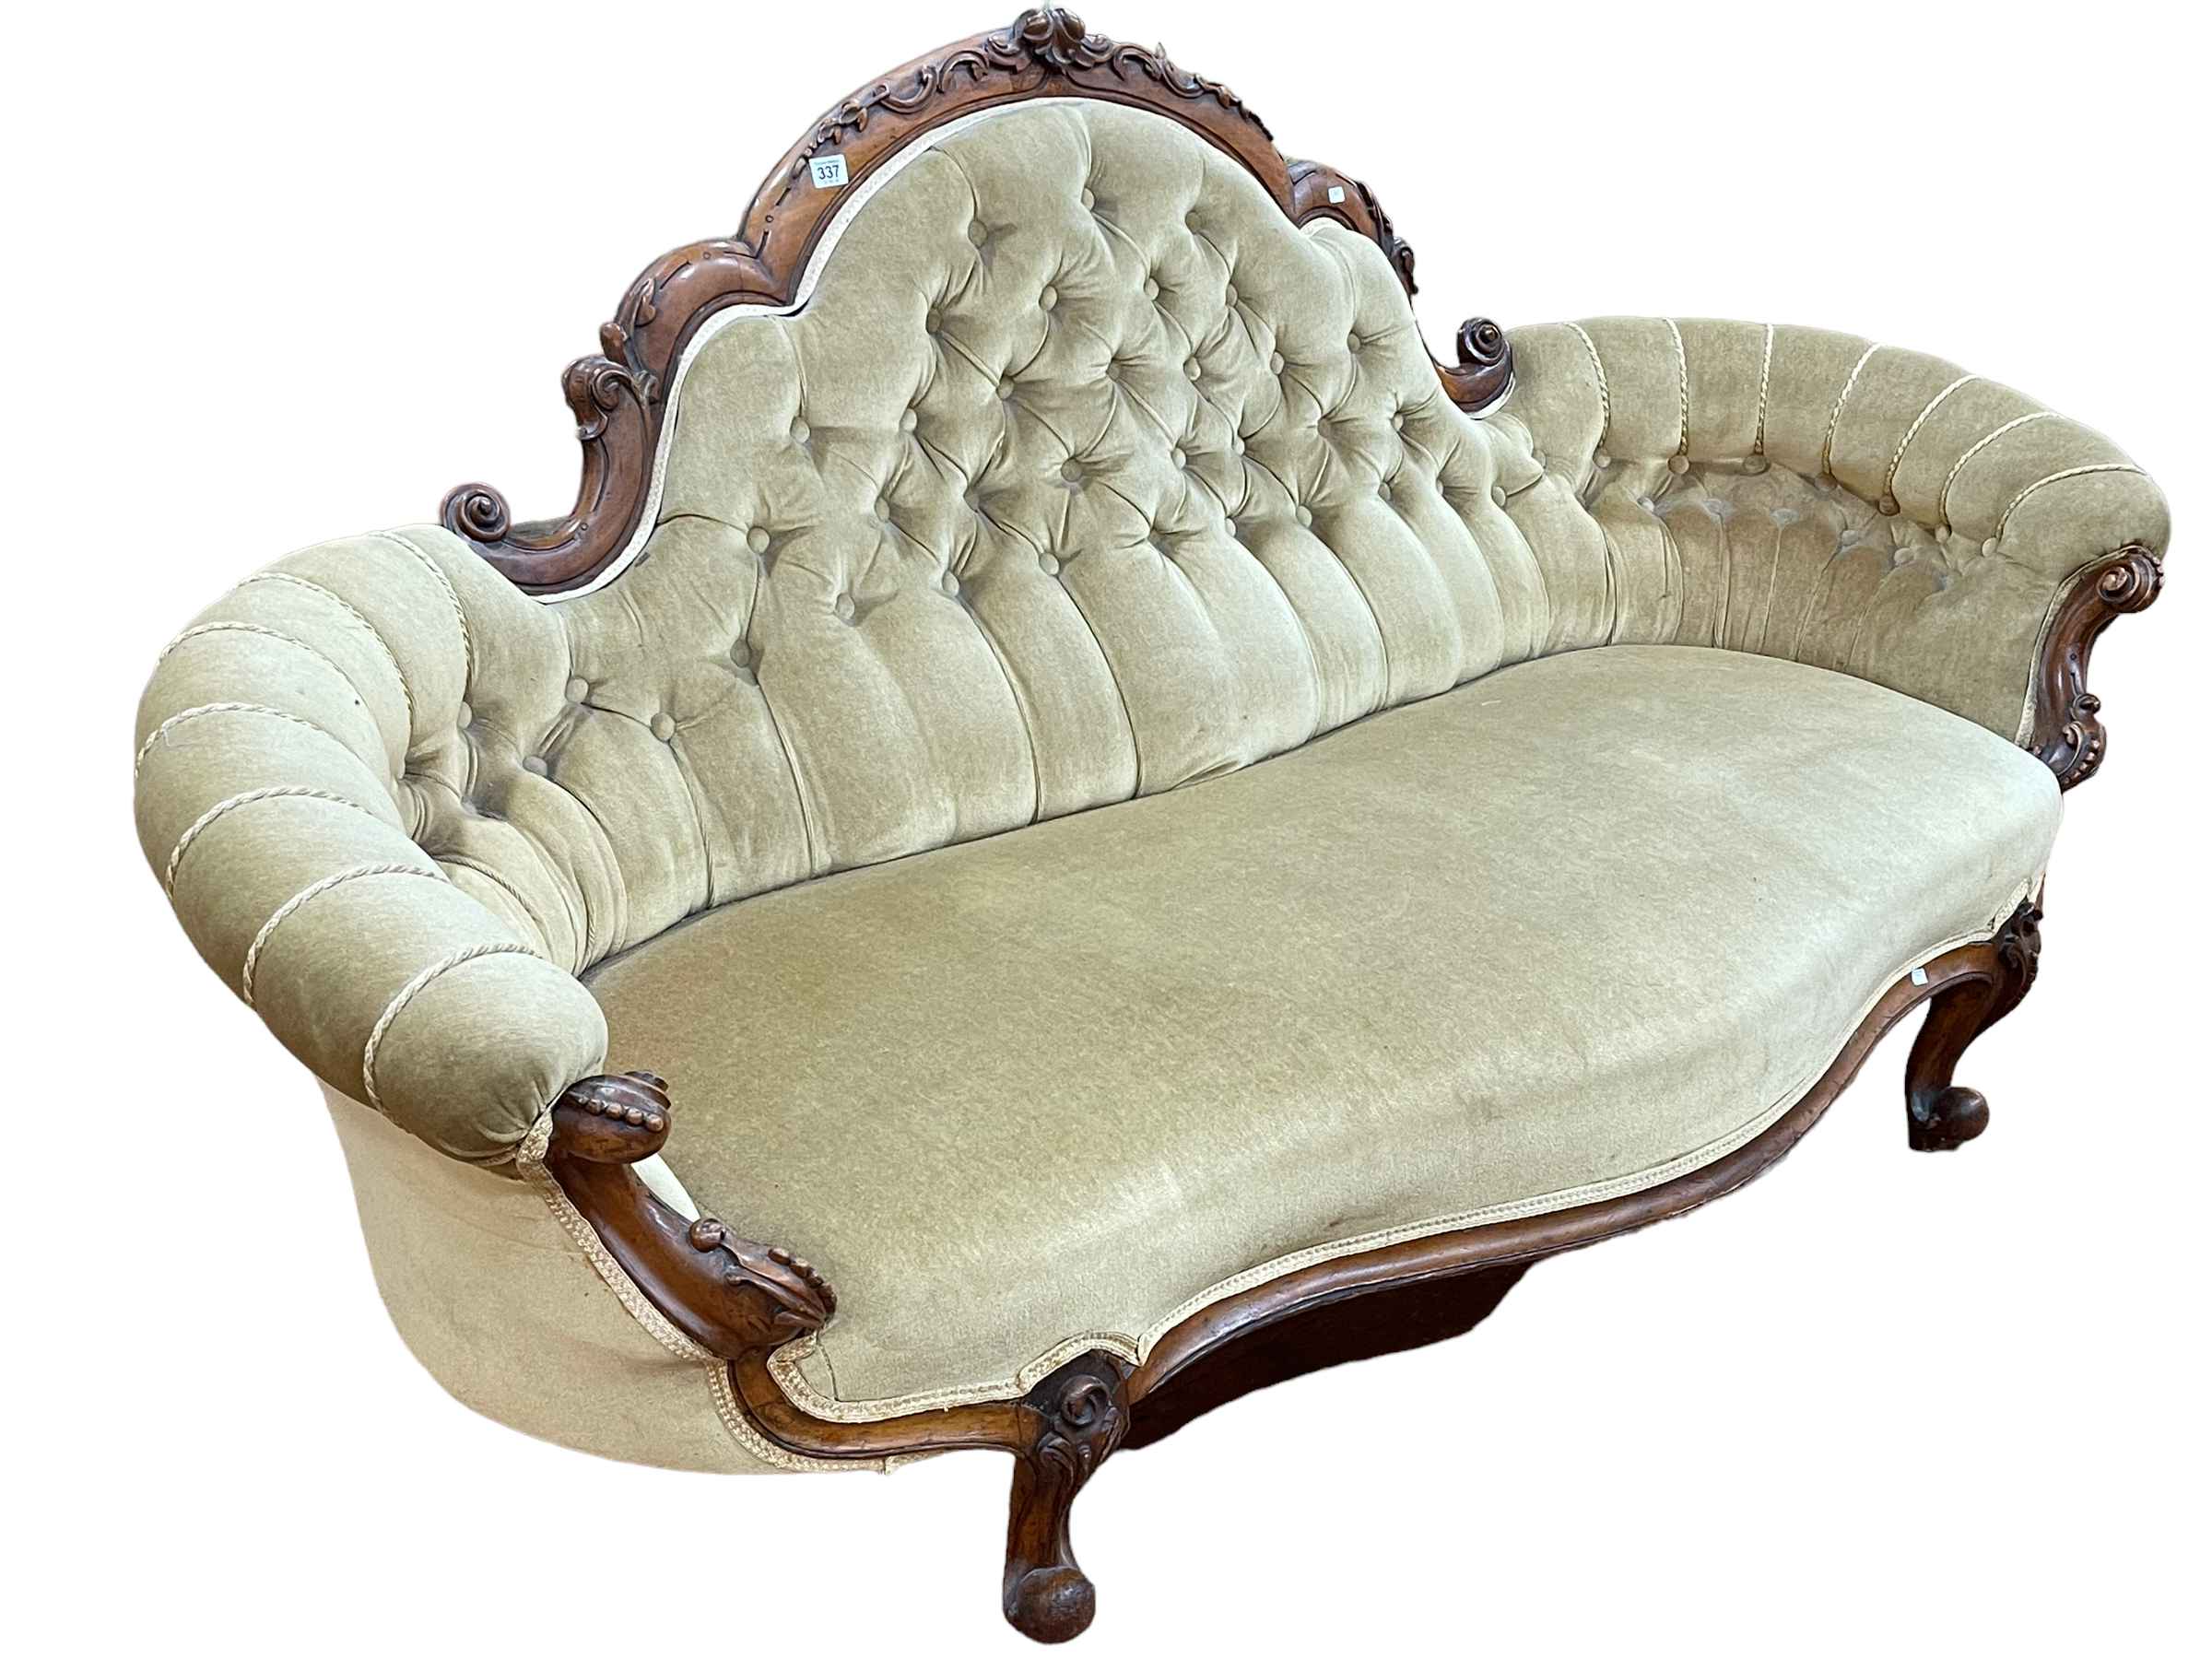 Victorian walnut framed arched back settee with serpentine front seat in buttoned draylon.